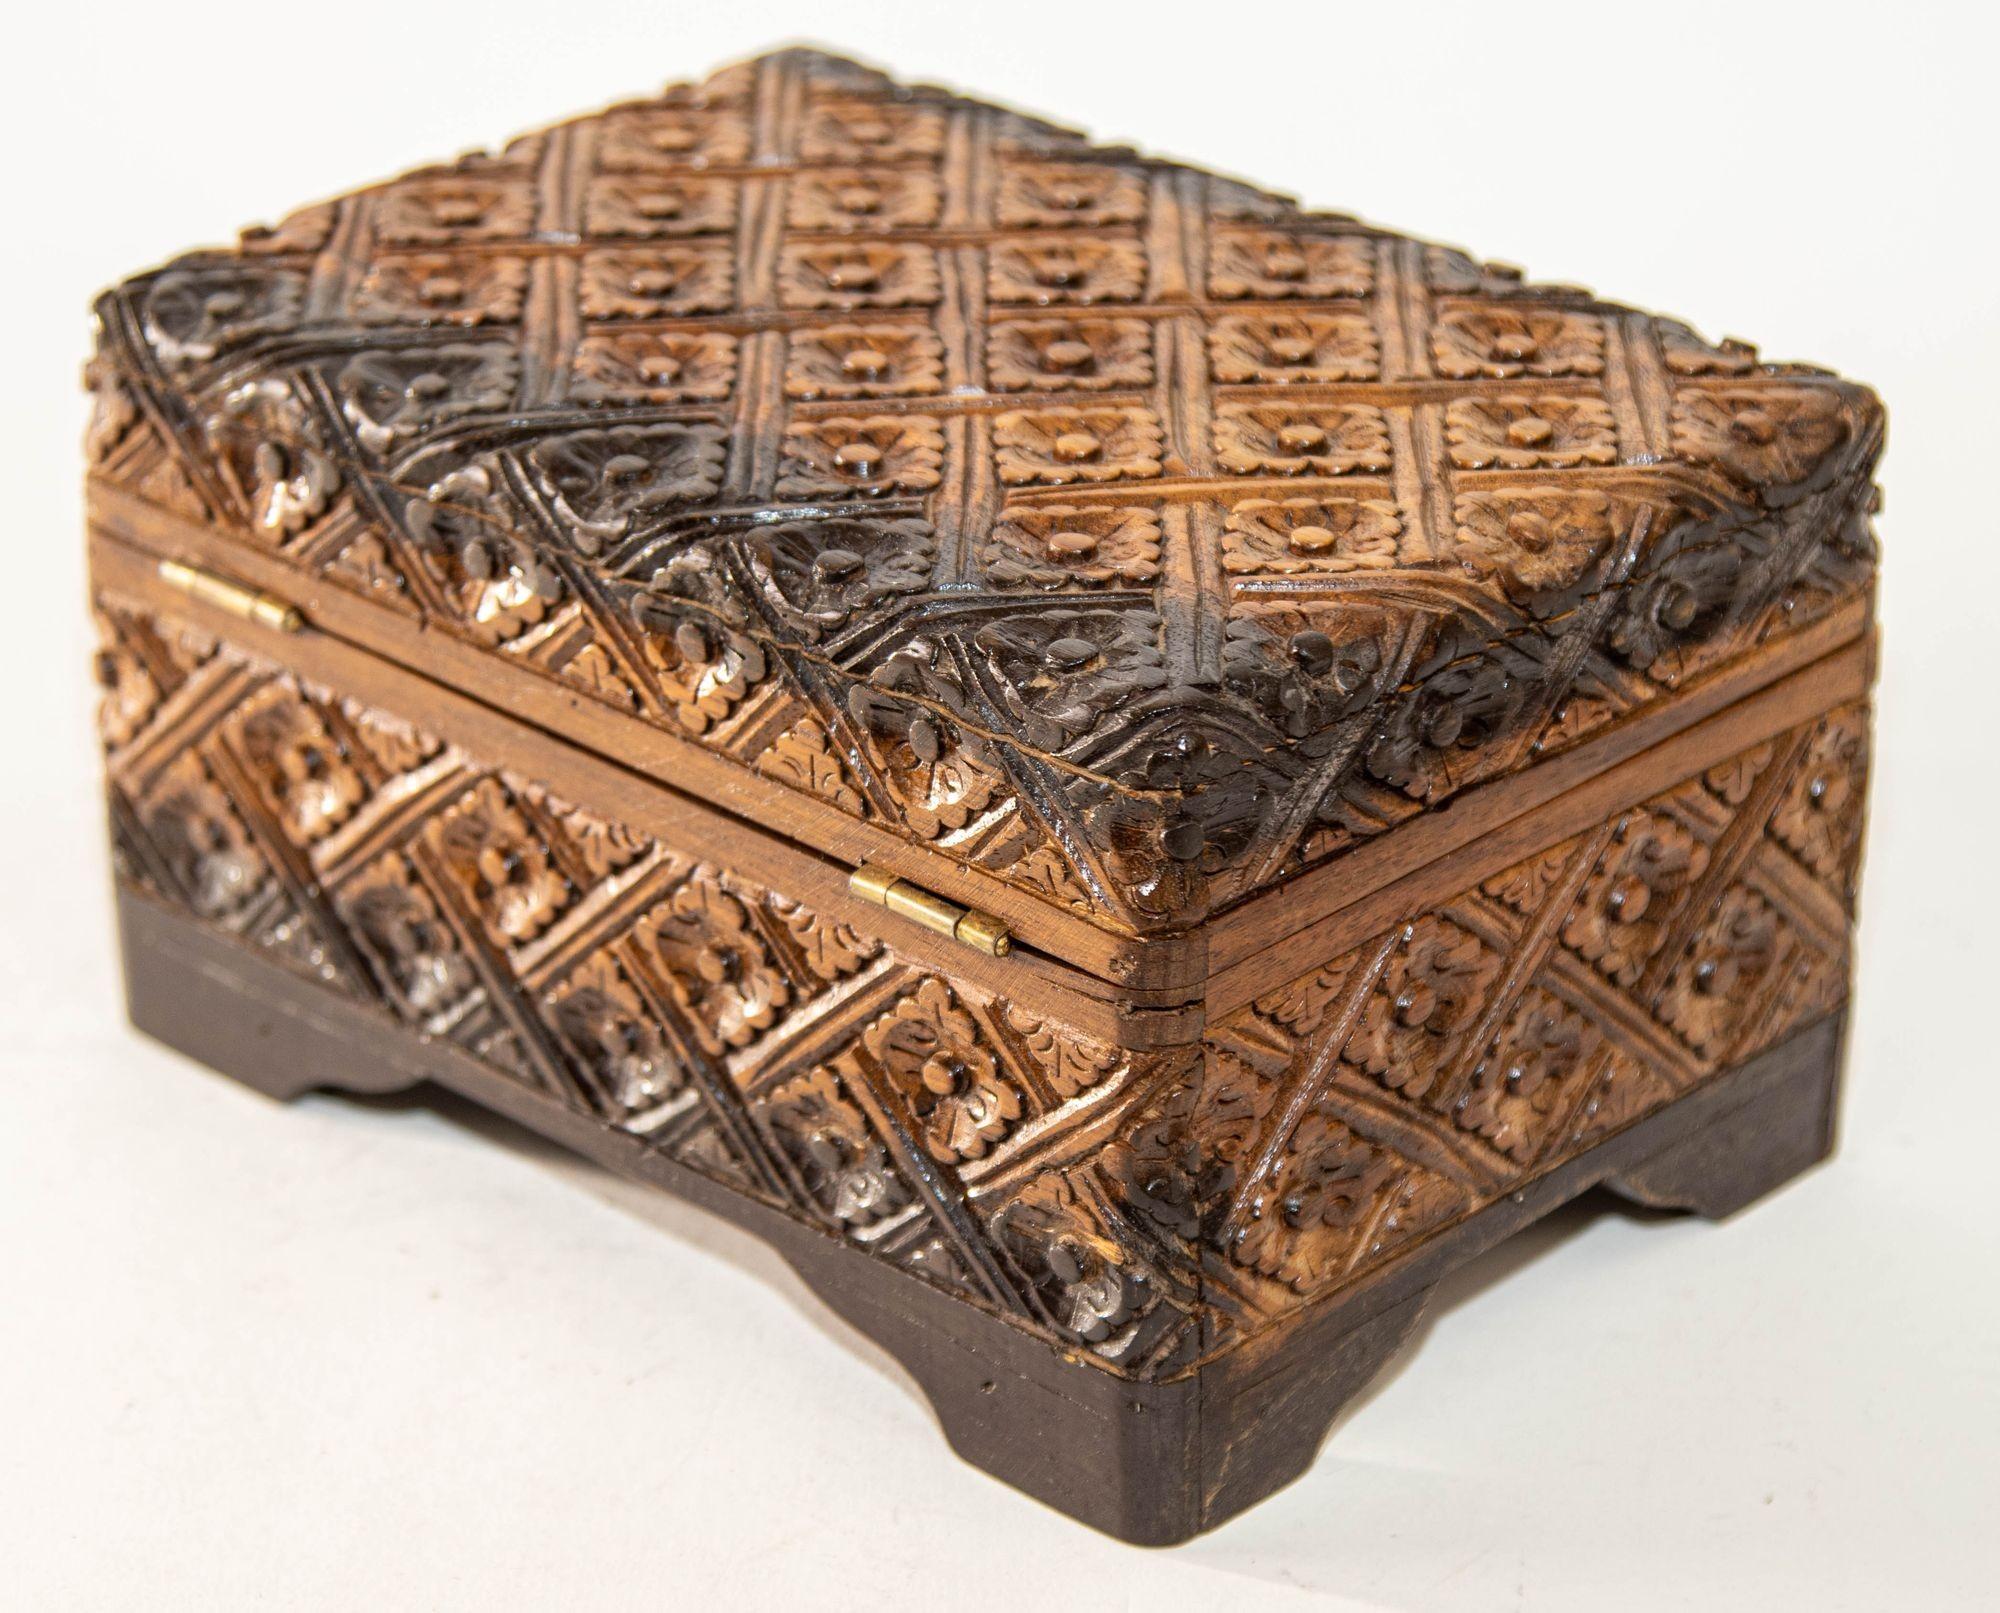 1950s Vintage Asian Large Hand Carved Wooden Humidor Box.
Hand-carved Kashmiri style Mid 20th century wood box richly decorated overall with stylized floral carving, bicolor light and dark brown with hinged lid shallow relief carving.
Handcrafted